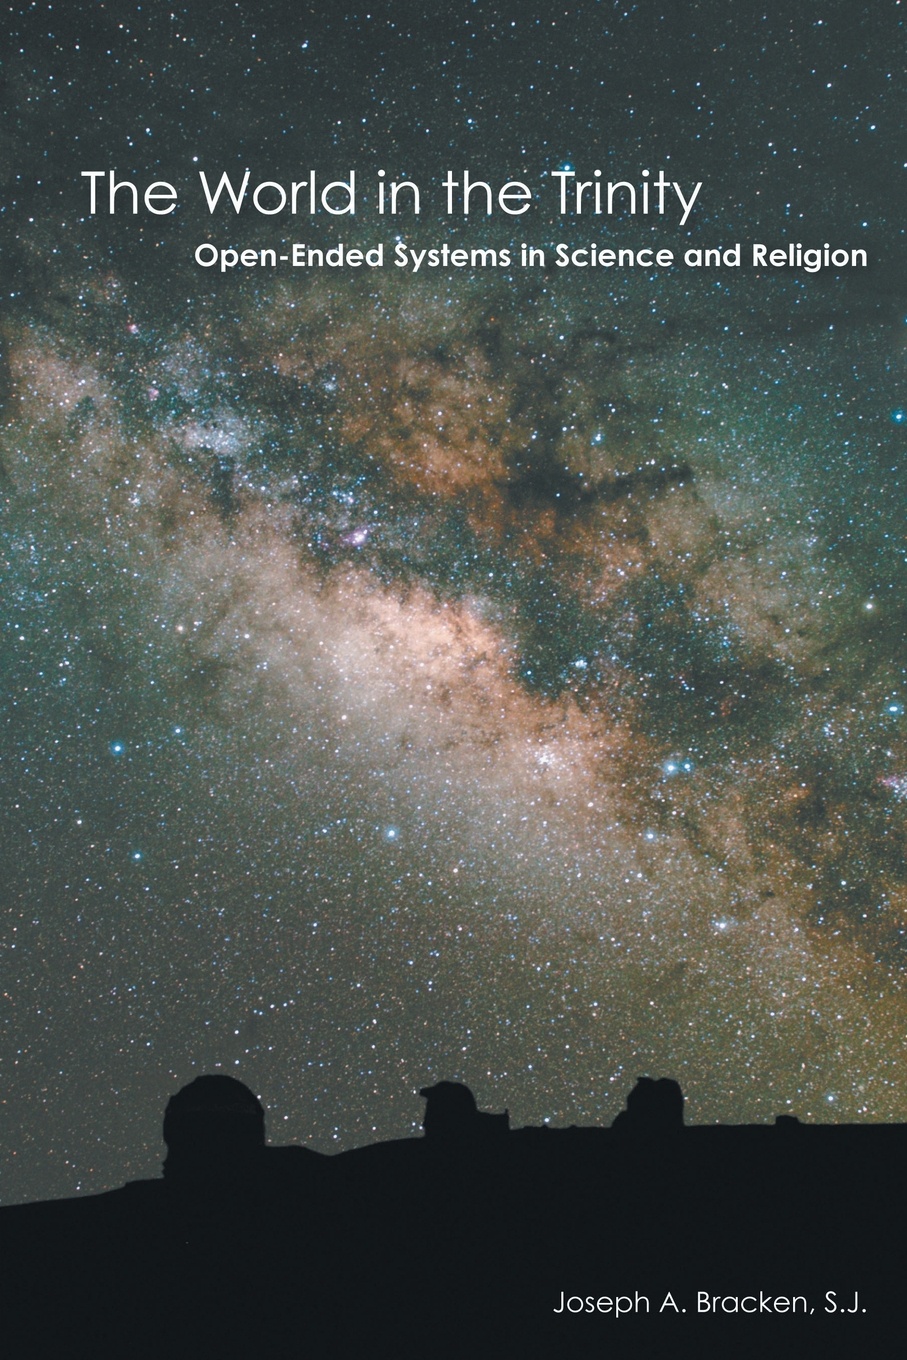 The World in the Trinity. Open-Ended Systems in Science and Religion